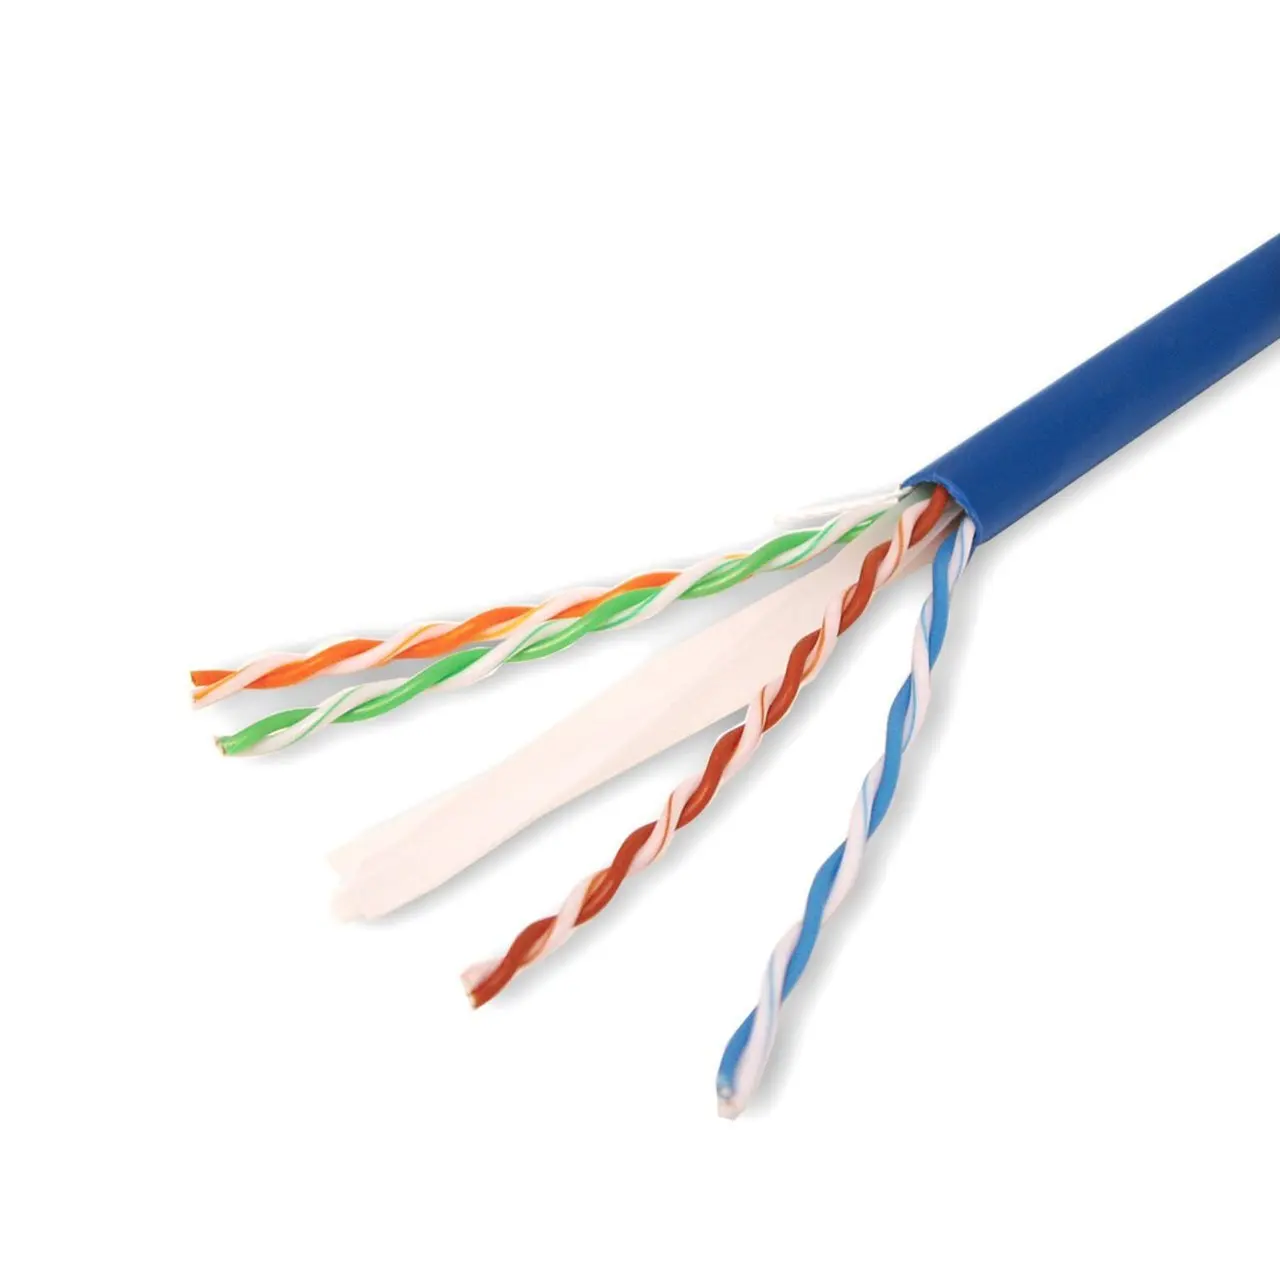 utp Cat 5E Cat5 Cat6A Cat6 LAN Cable network cable